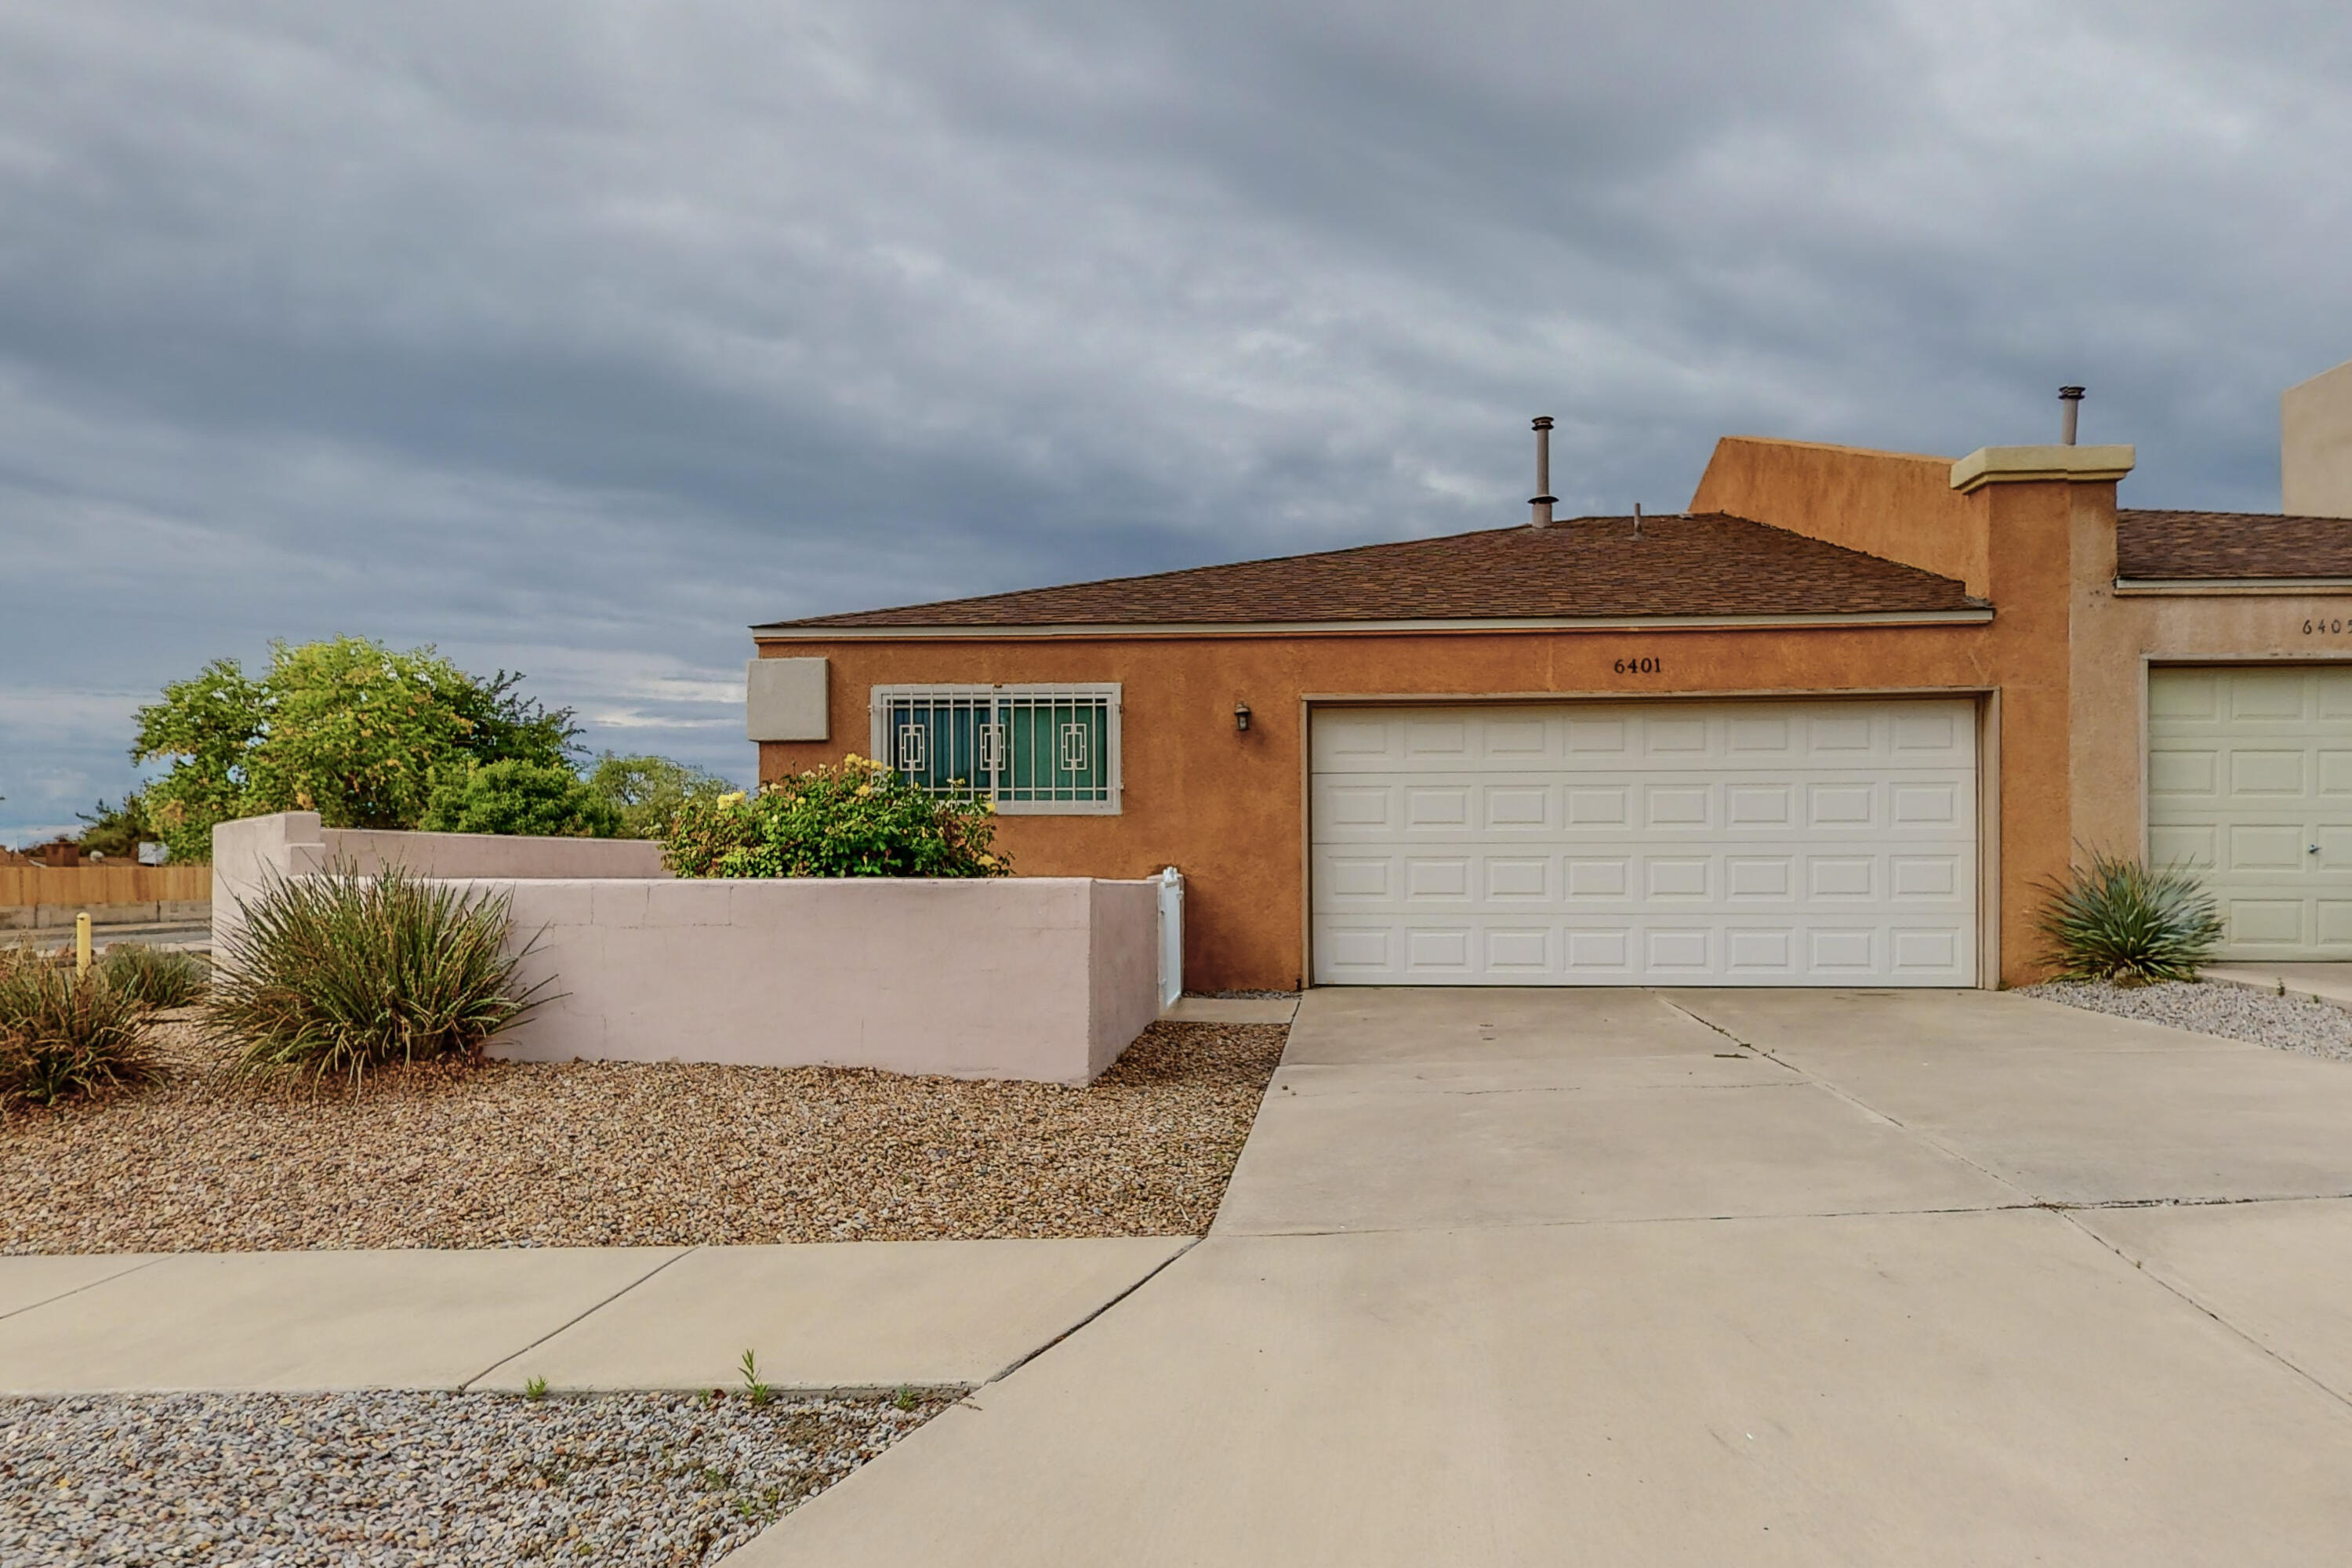 MULTIPLE OFFERS. Spacious 2 Bedroom with 2 full Bathrooms Town Home in great NE Albuquerque location. No HOA. This Town Home is situated on a large Corner Lot and offers a nice Floorplan, large Primary Bedroom with double sinks in Bathroom and walk-in Closet. All appliances included!